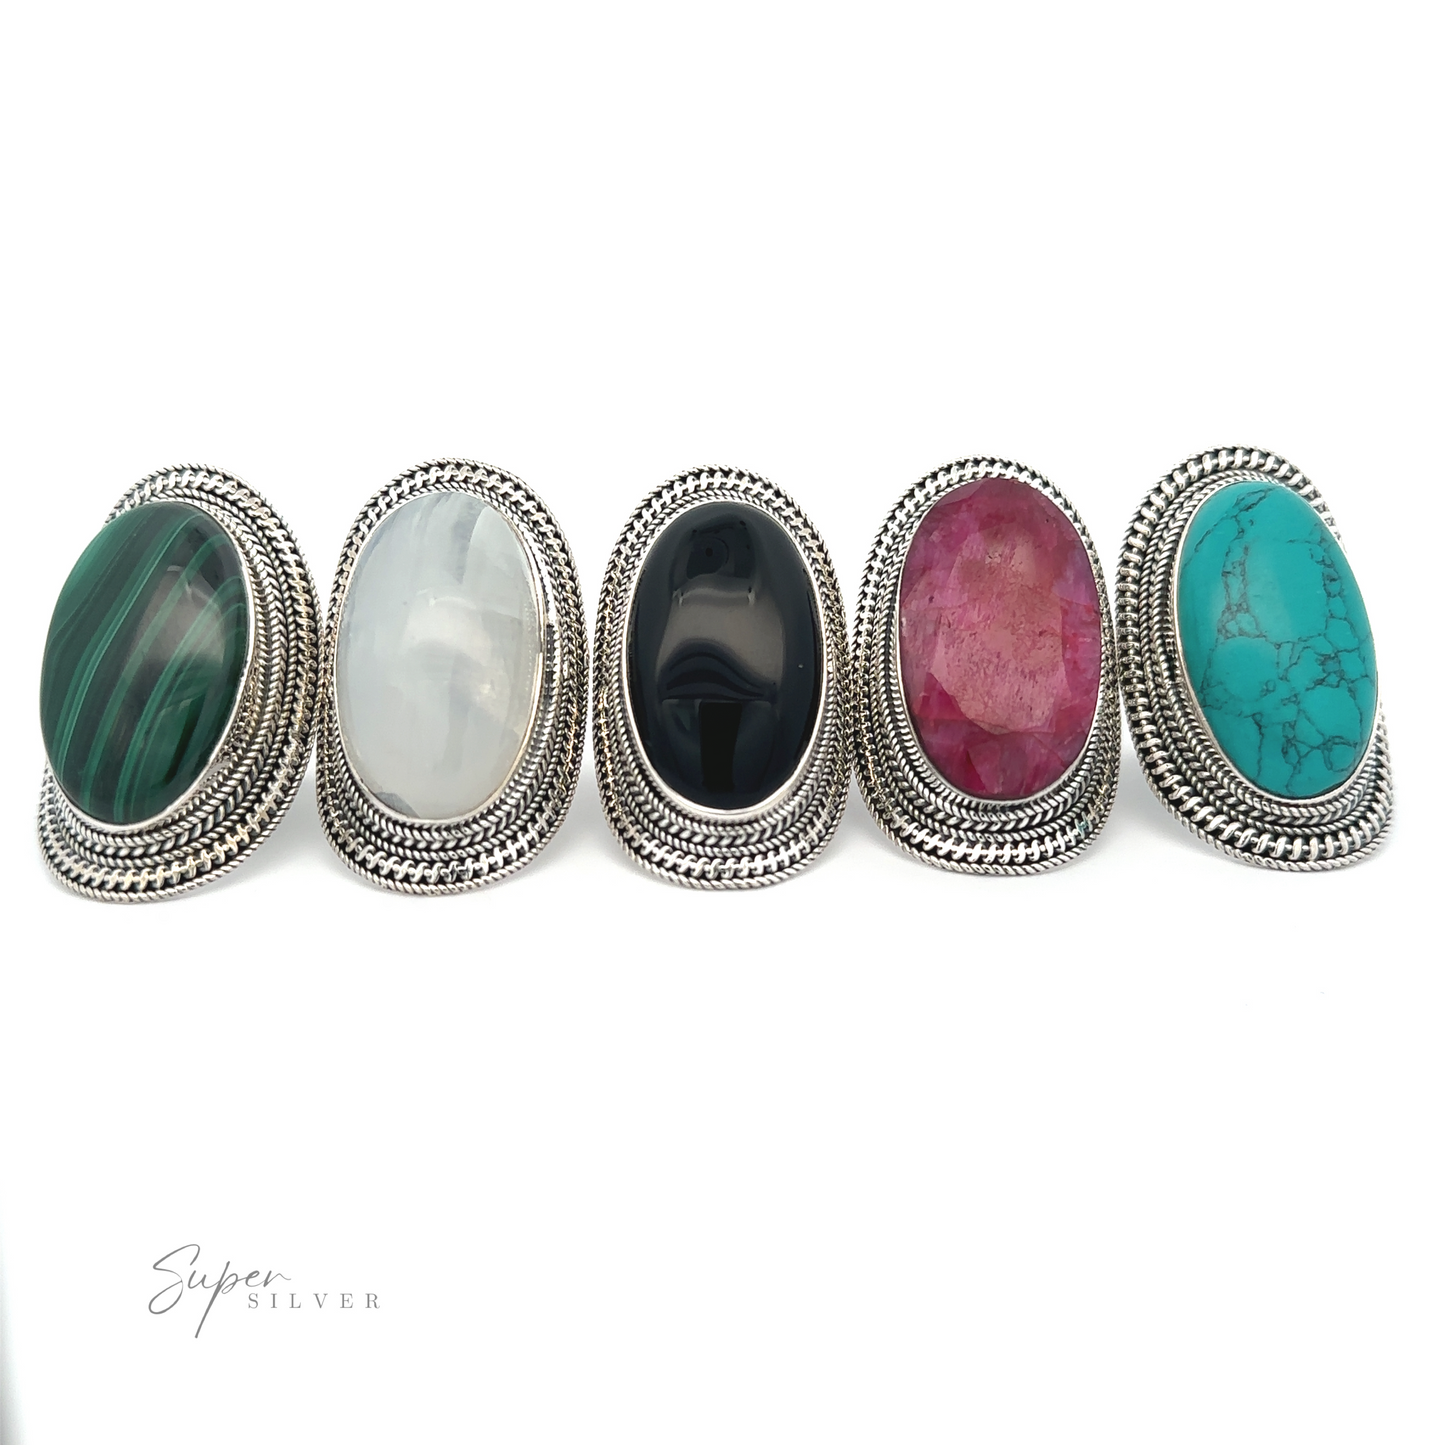 
                  
                    Five Large Oval Shield Gemstone Rings with large oval gemstones in green, white, black, pink, and turquoise set in intricately detailed silver bands are displayed in a row against a white background, exuding a bohemian flair.
                  
                